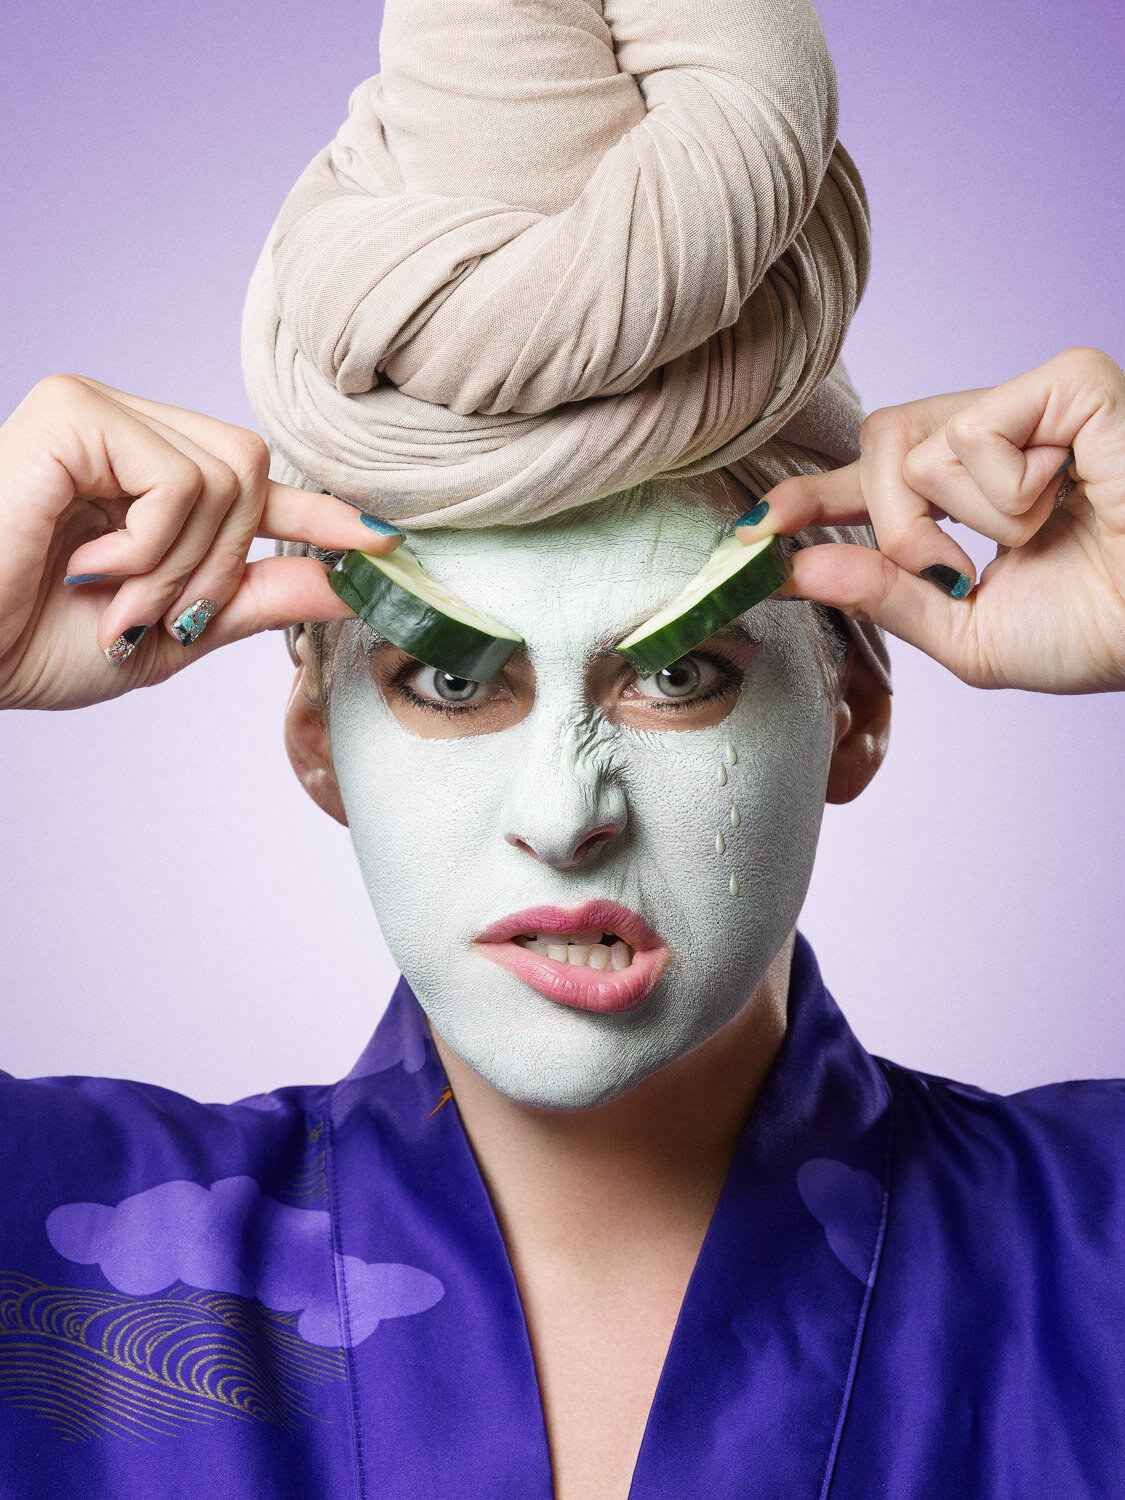 performer Michelle Joni has mud mask and cucumber scowl; creative beauty portrait to promote her business by creative portrait photographer Hanna Agar